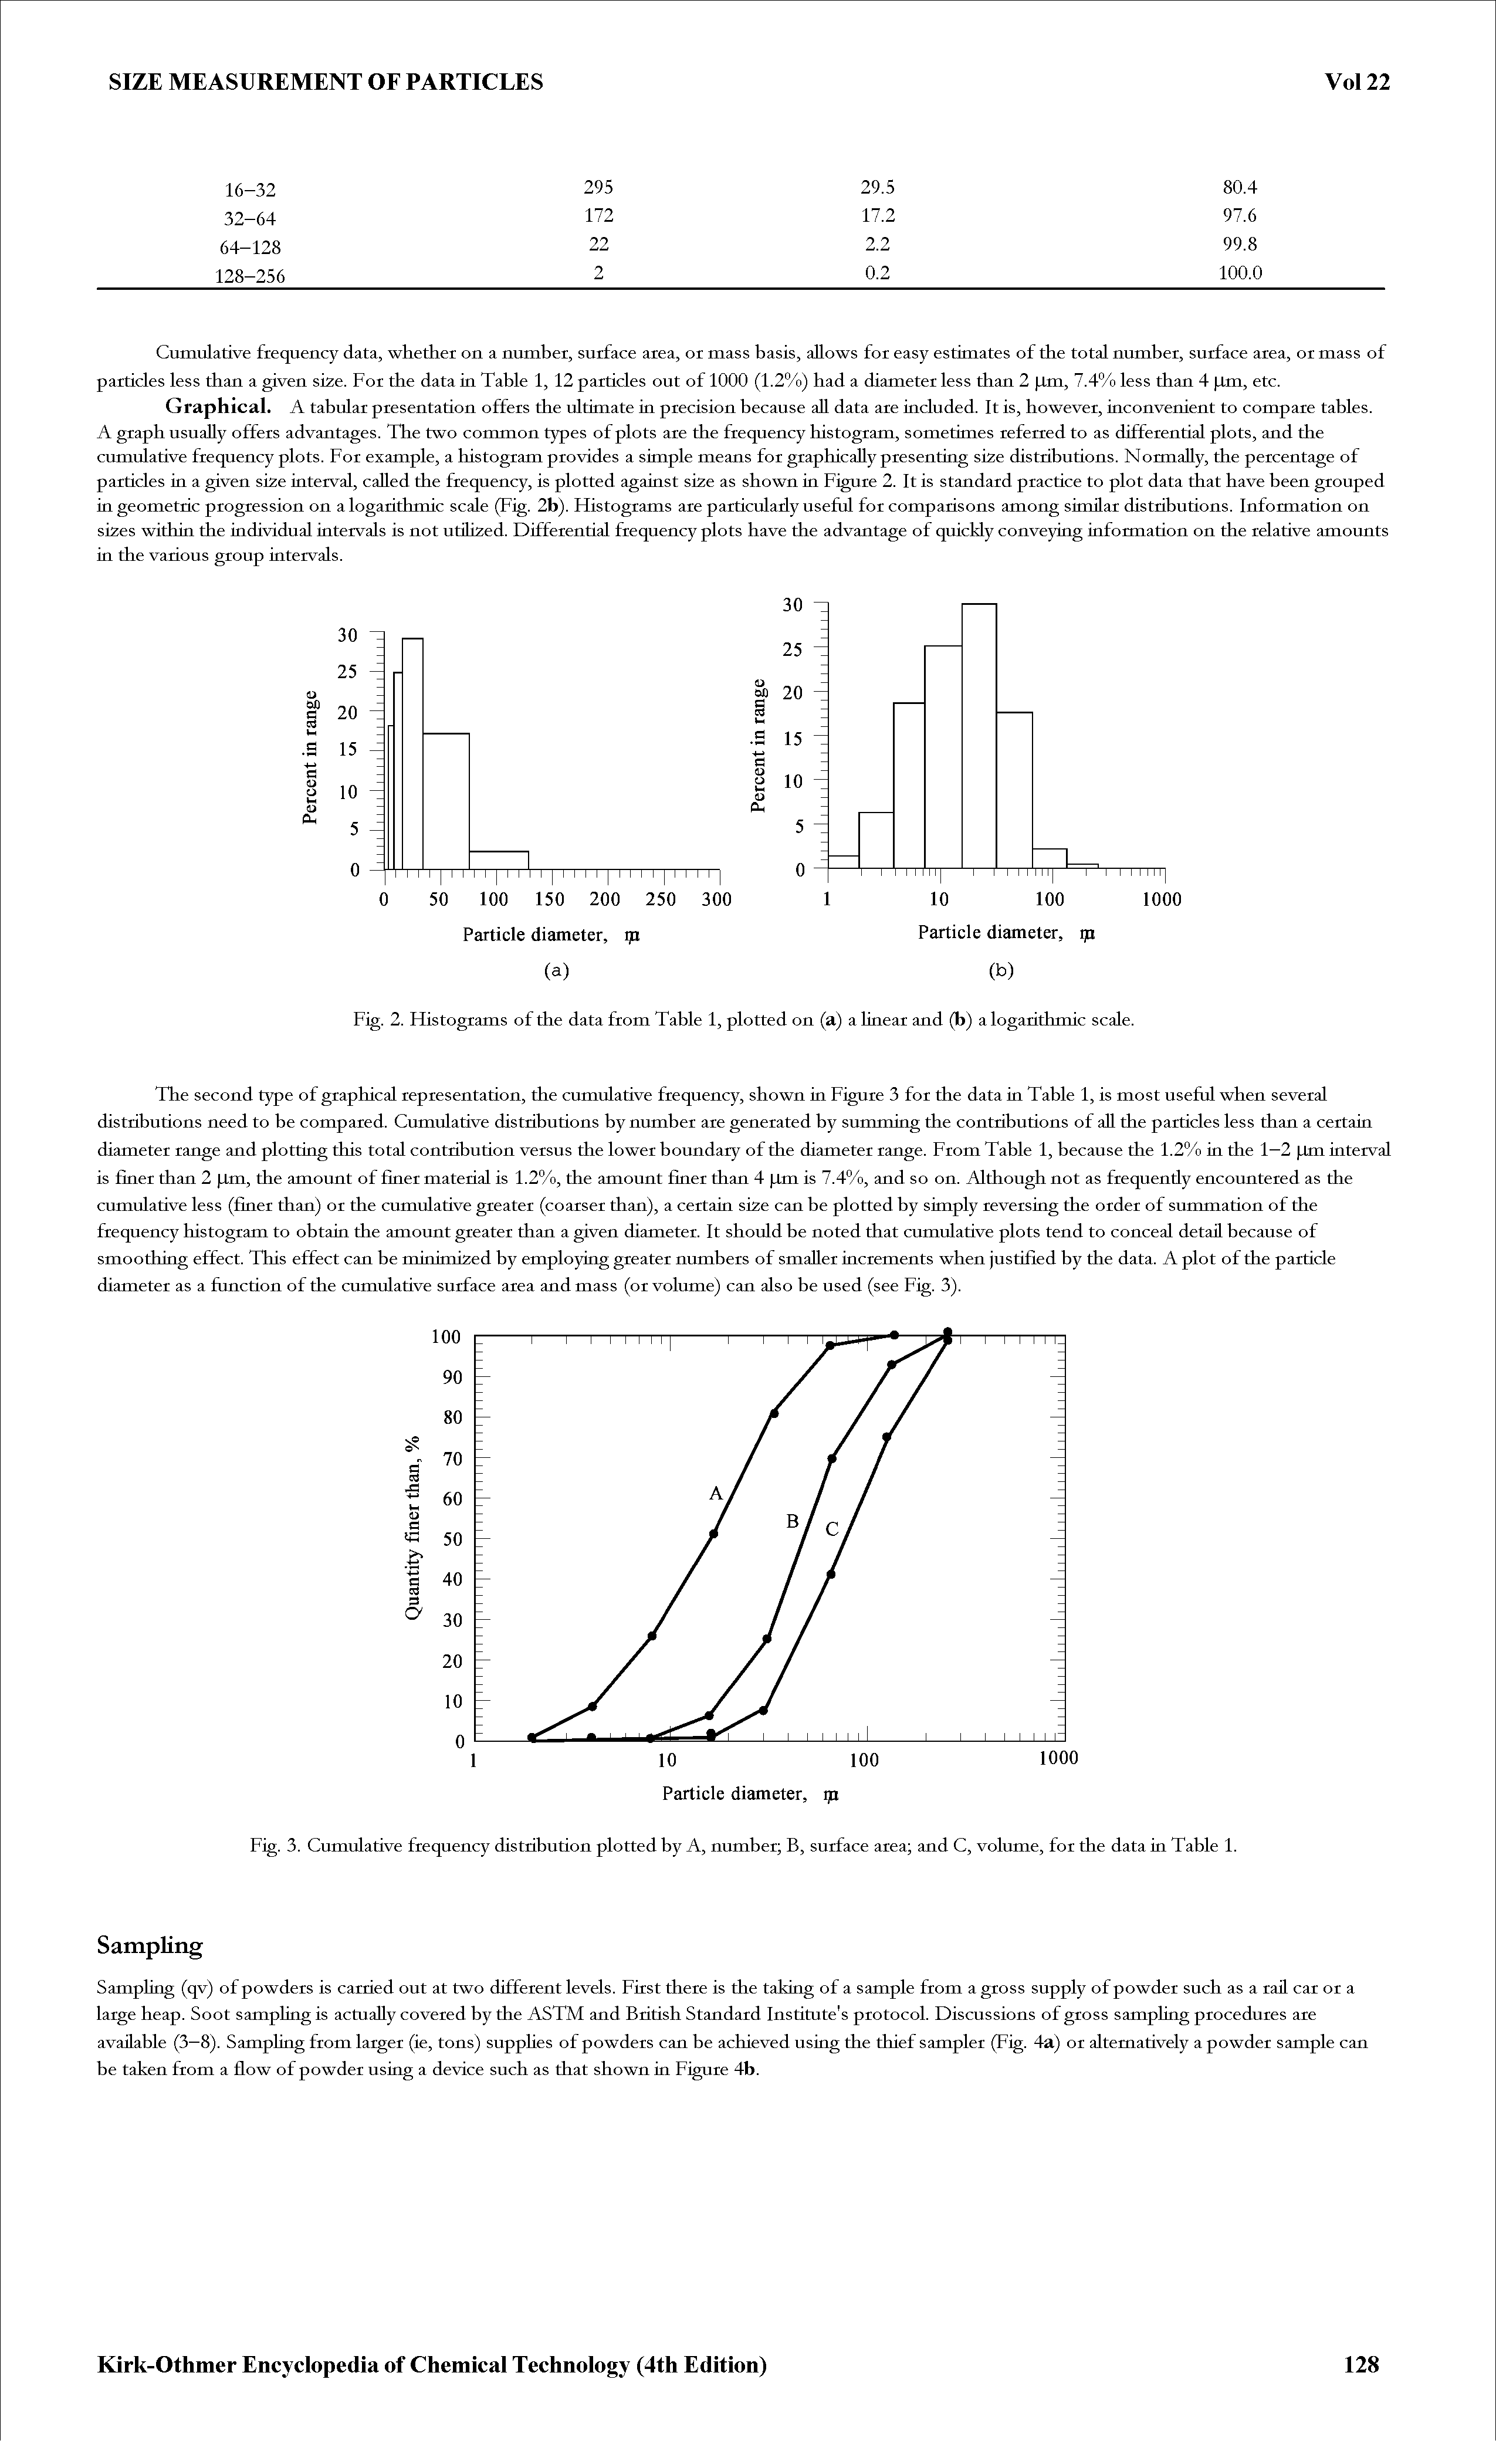 Fig. 3. Cumulative frequency distribution plotted by A, number B, surface area and C, volume, for the data in Table 1.